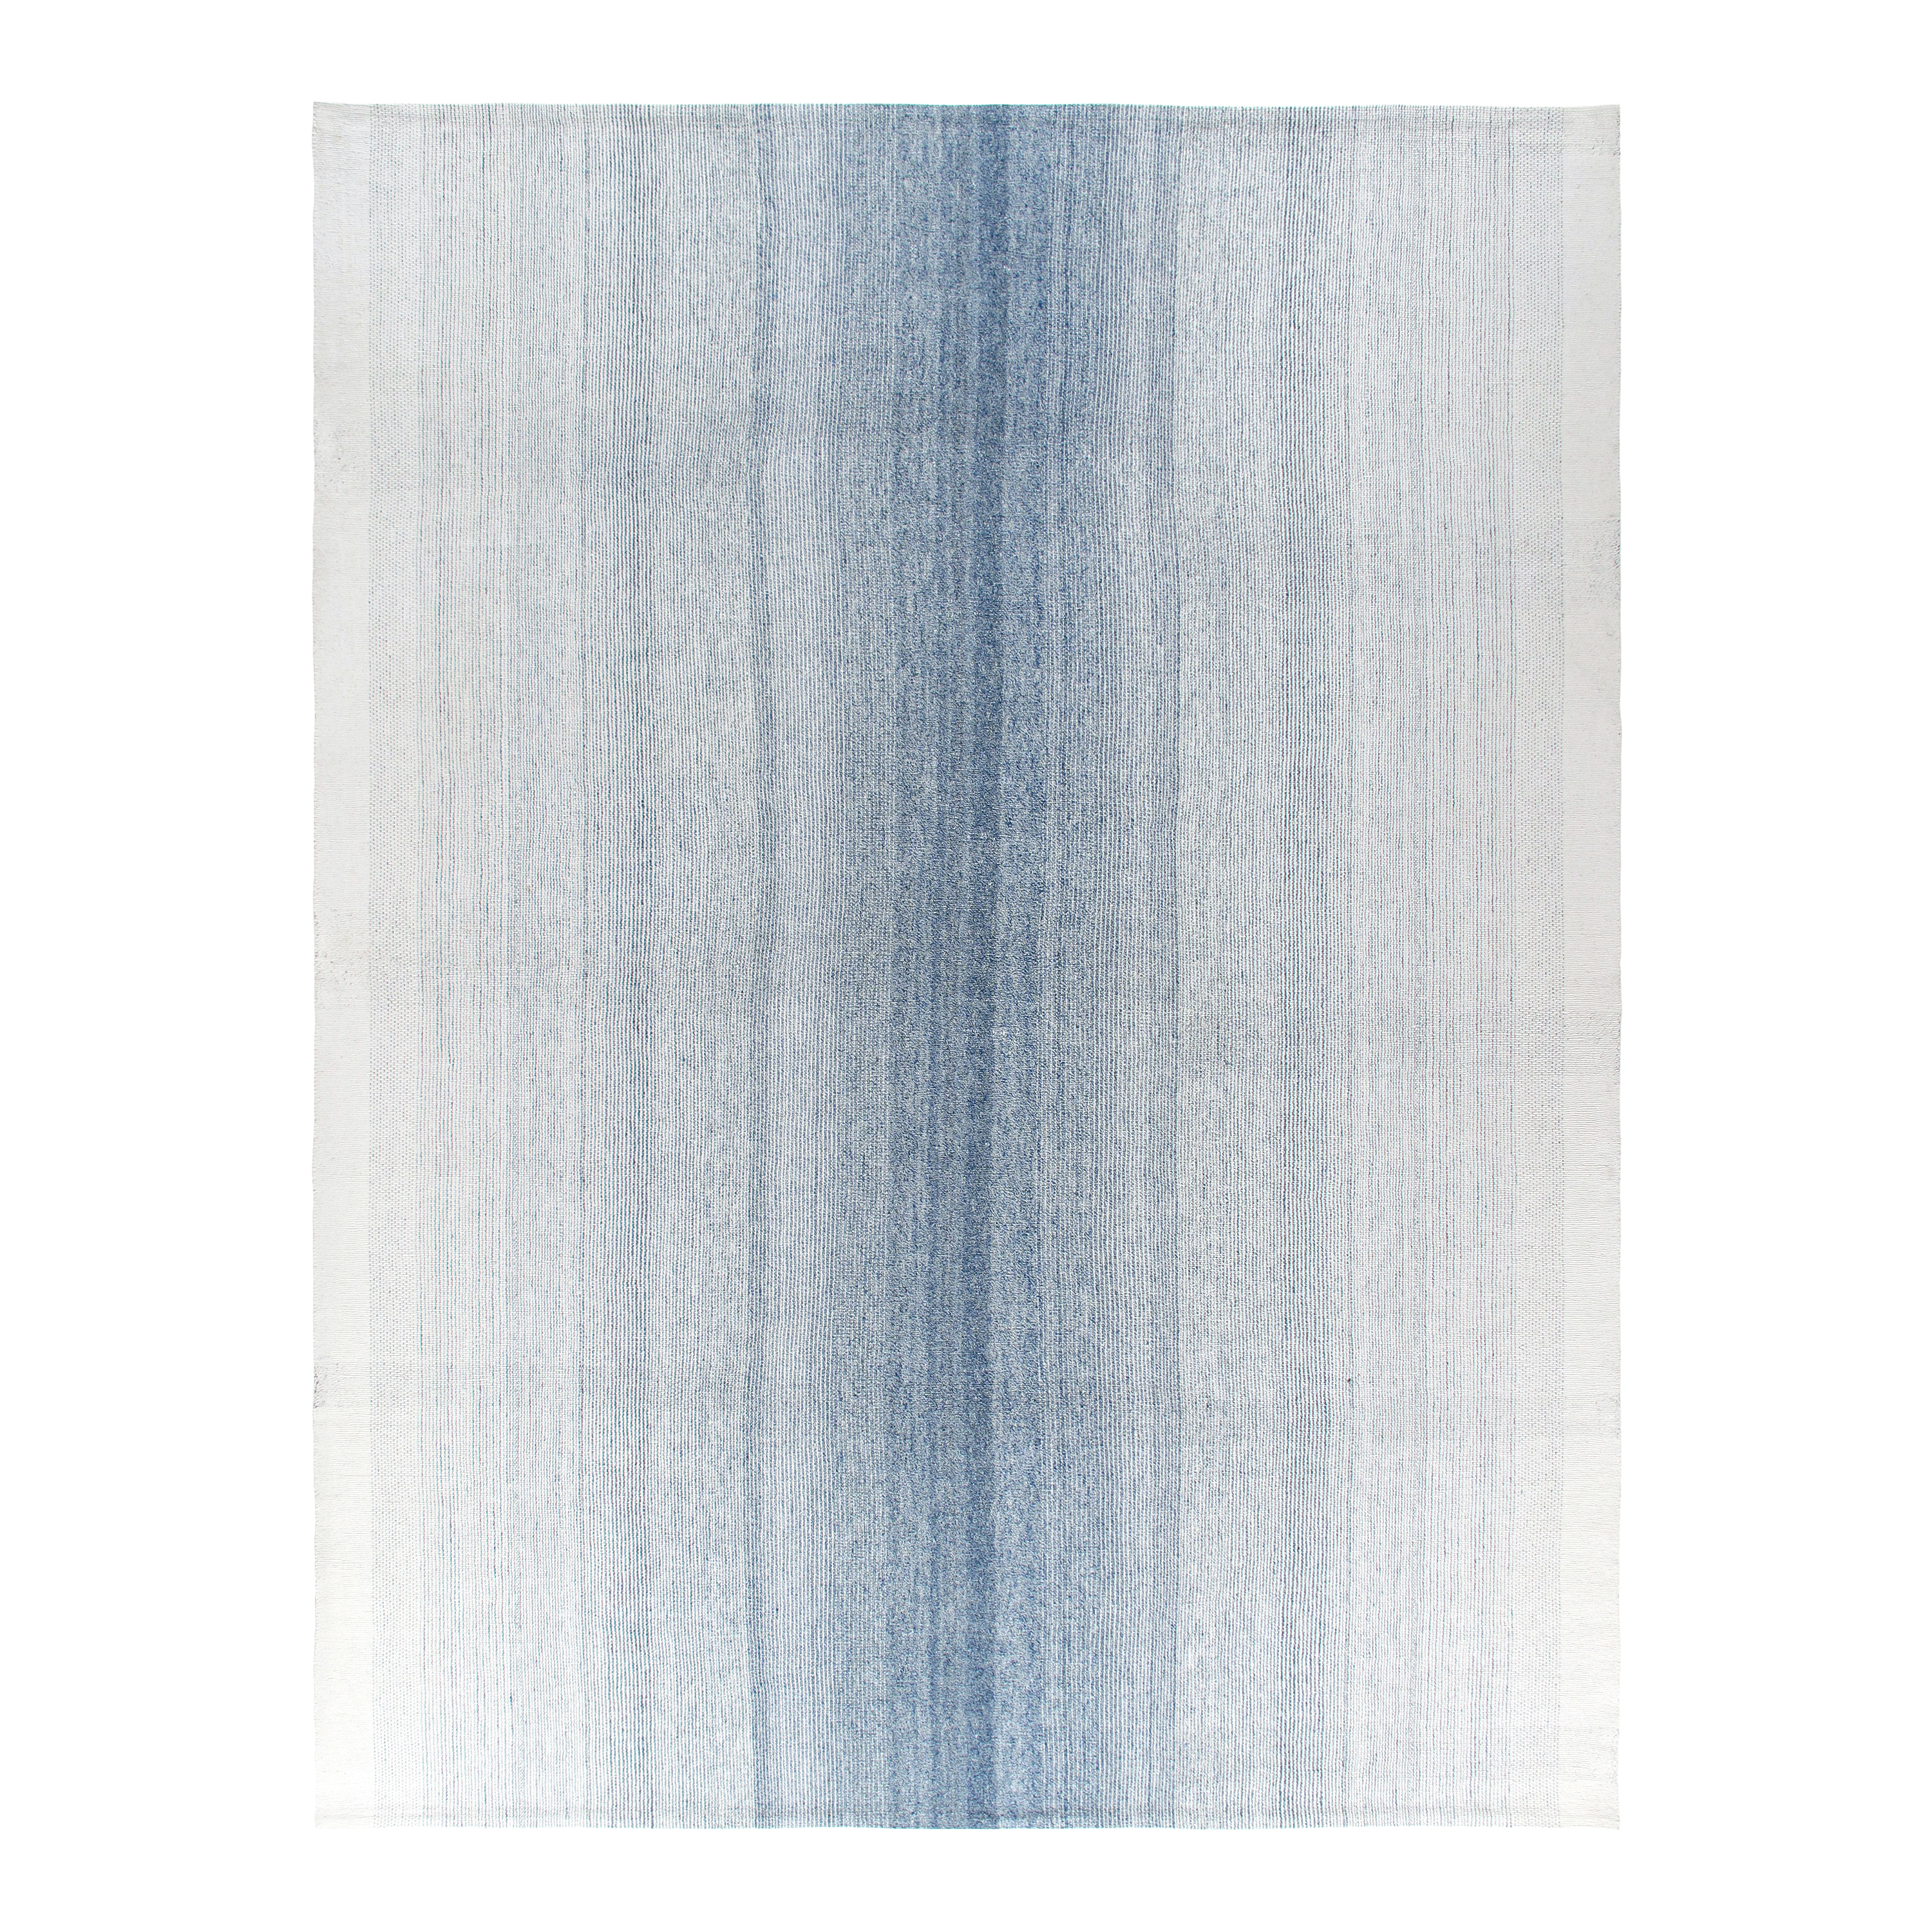 Ombre Pelas rug is a flatweave made with natural dyes, handspun wool, and cotton.